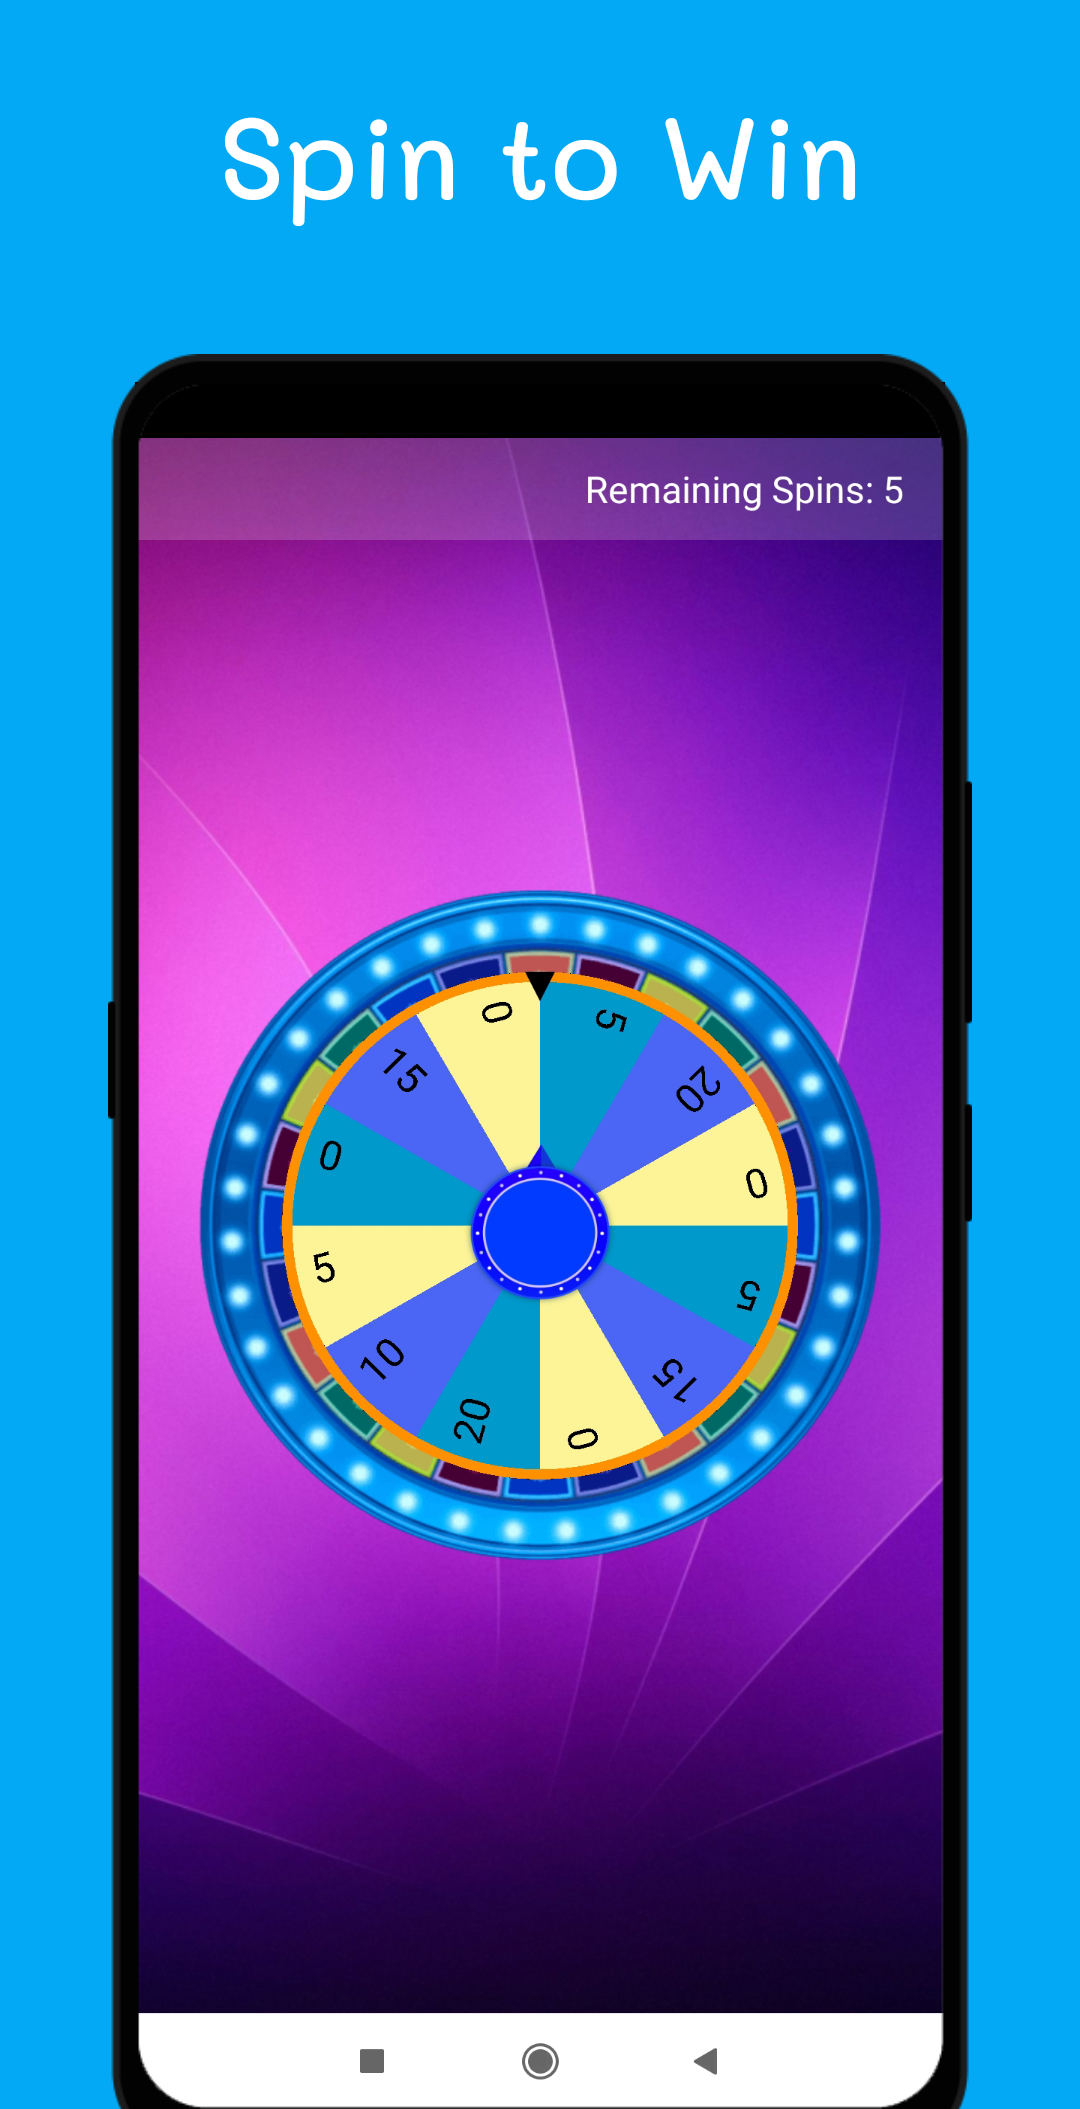 Play and Earn - Spin to Win Real Cash